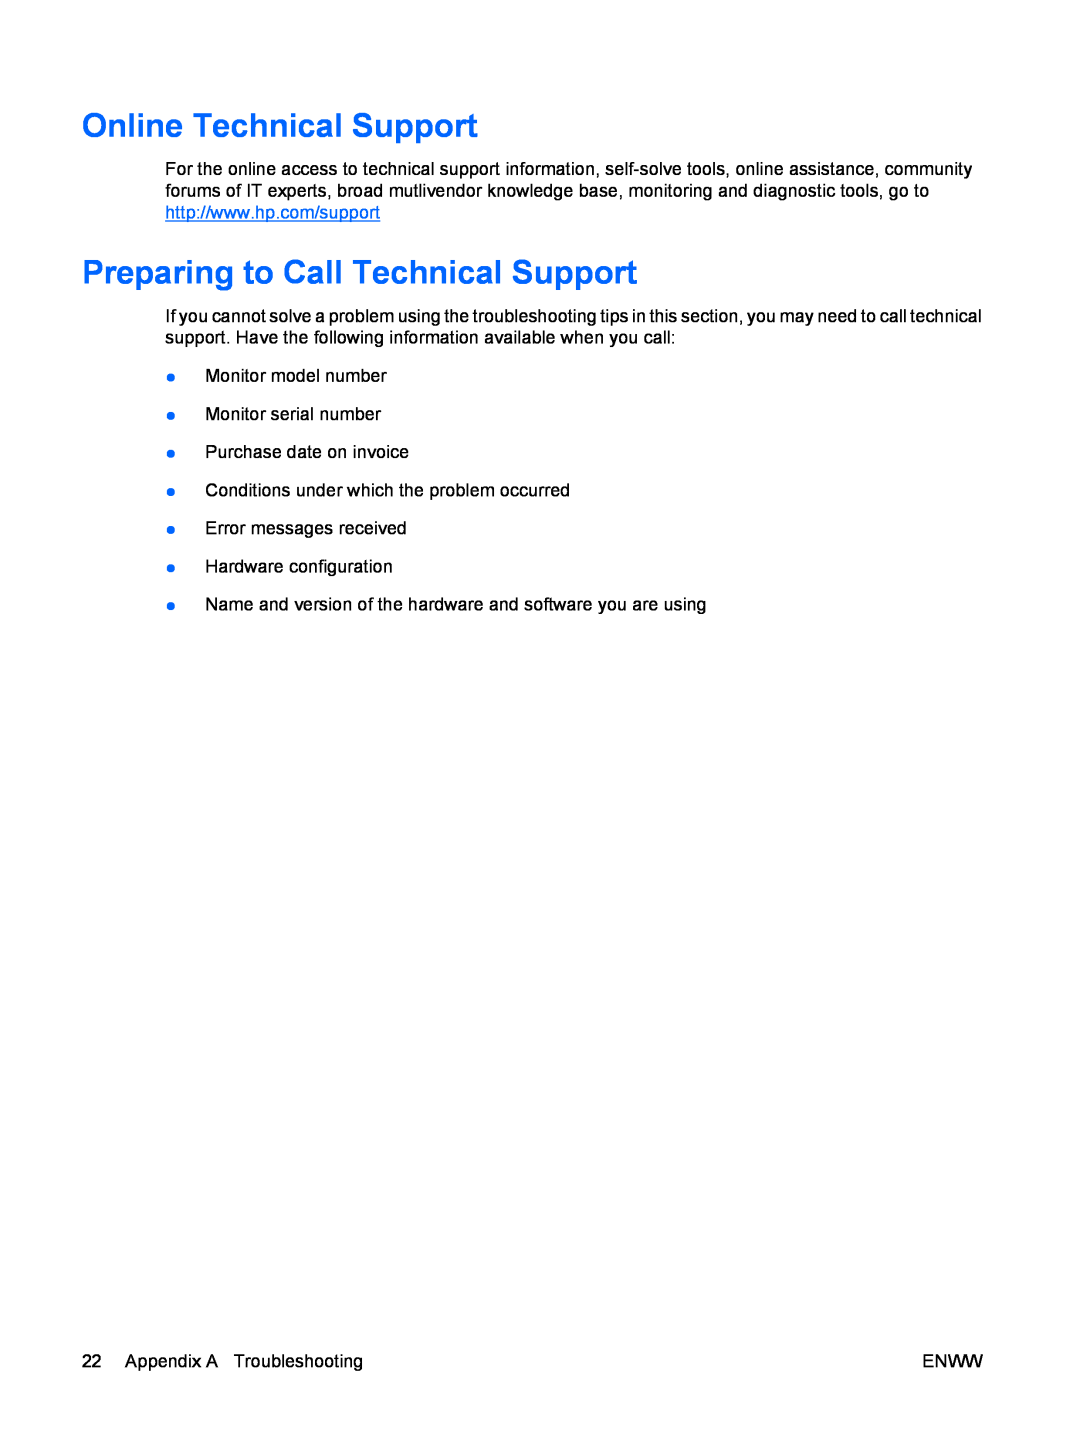 HP CQ1859s, CQ1859E manual Online Technical Support, Preparing to Call Technical Support 